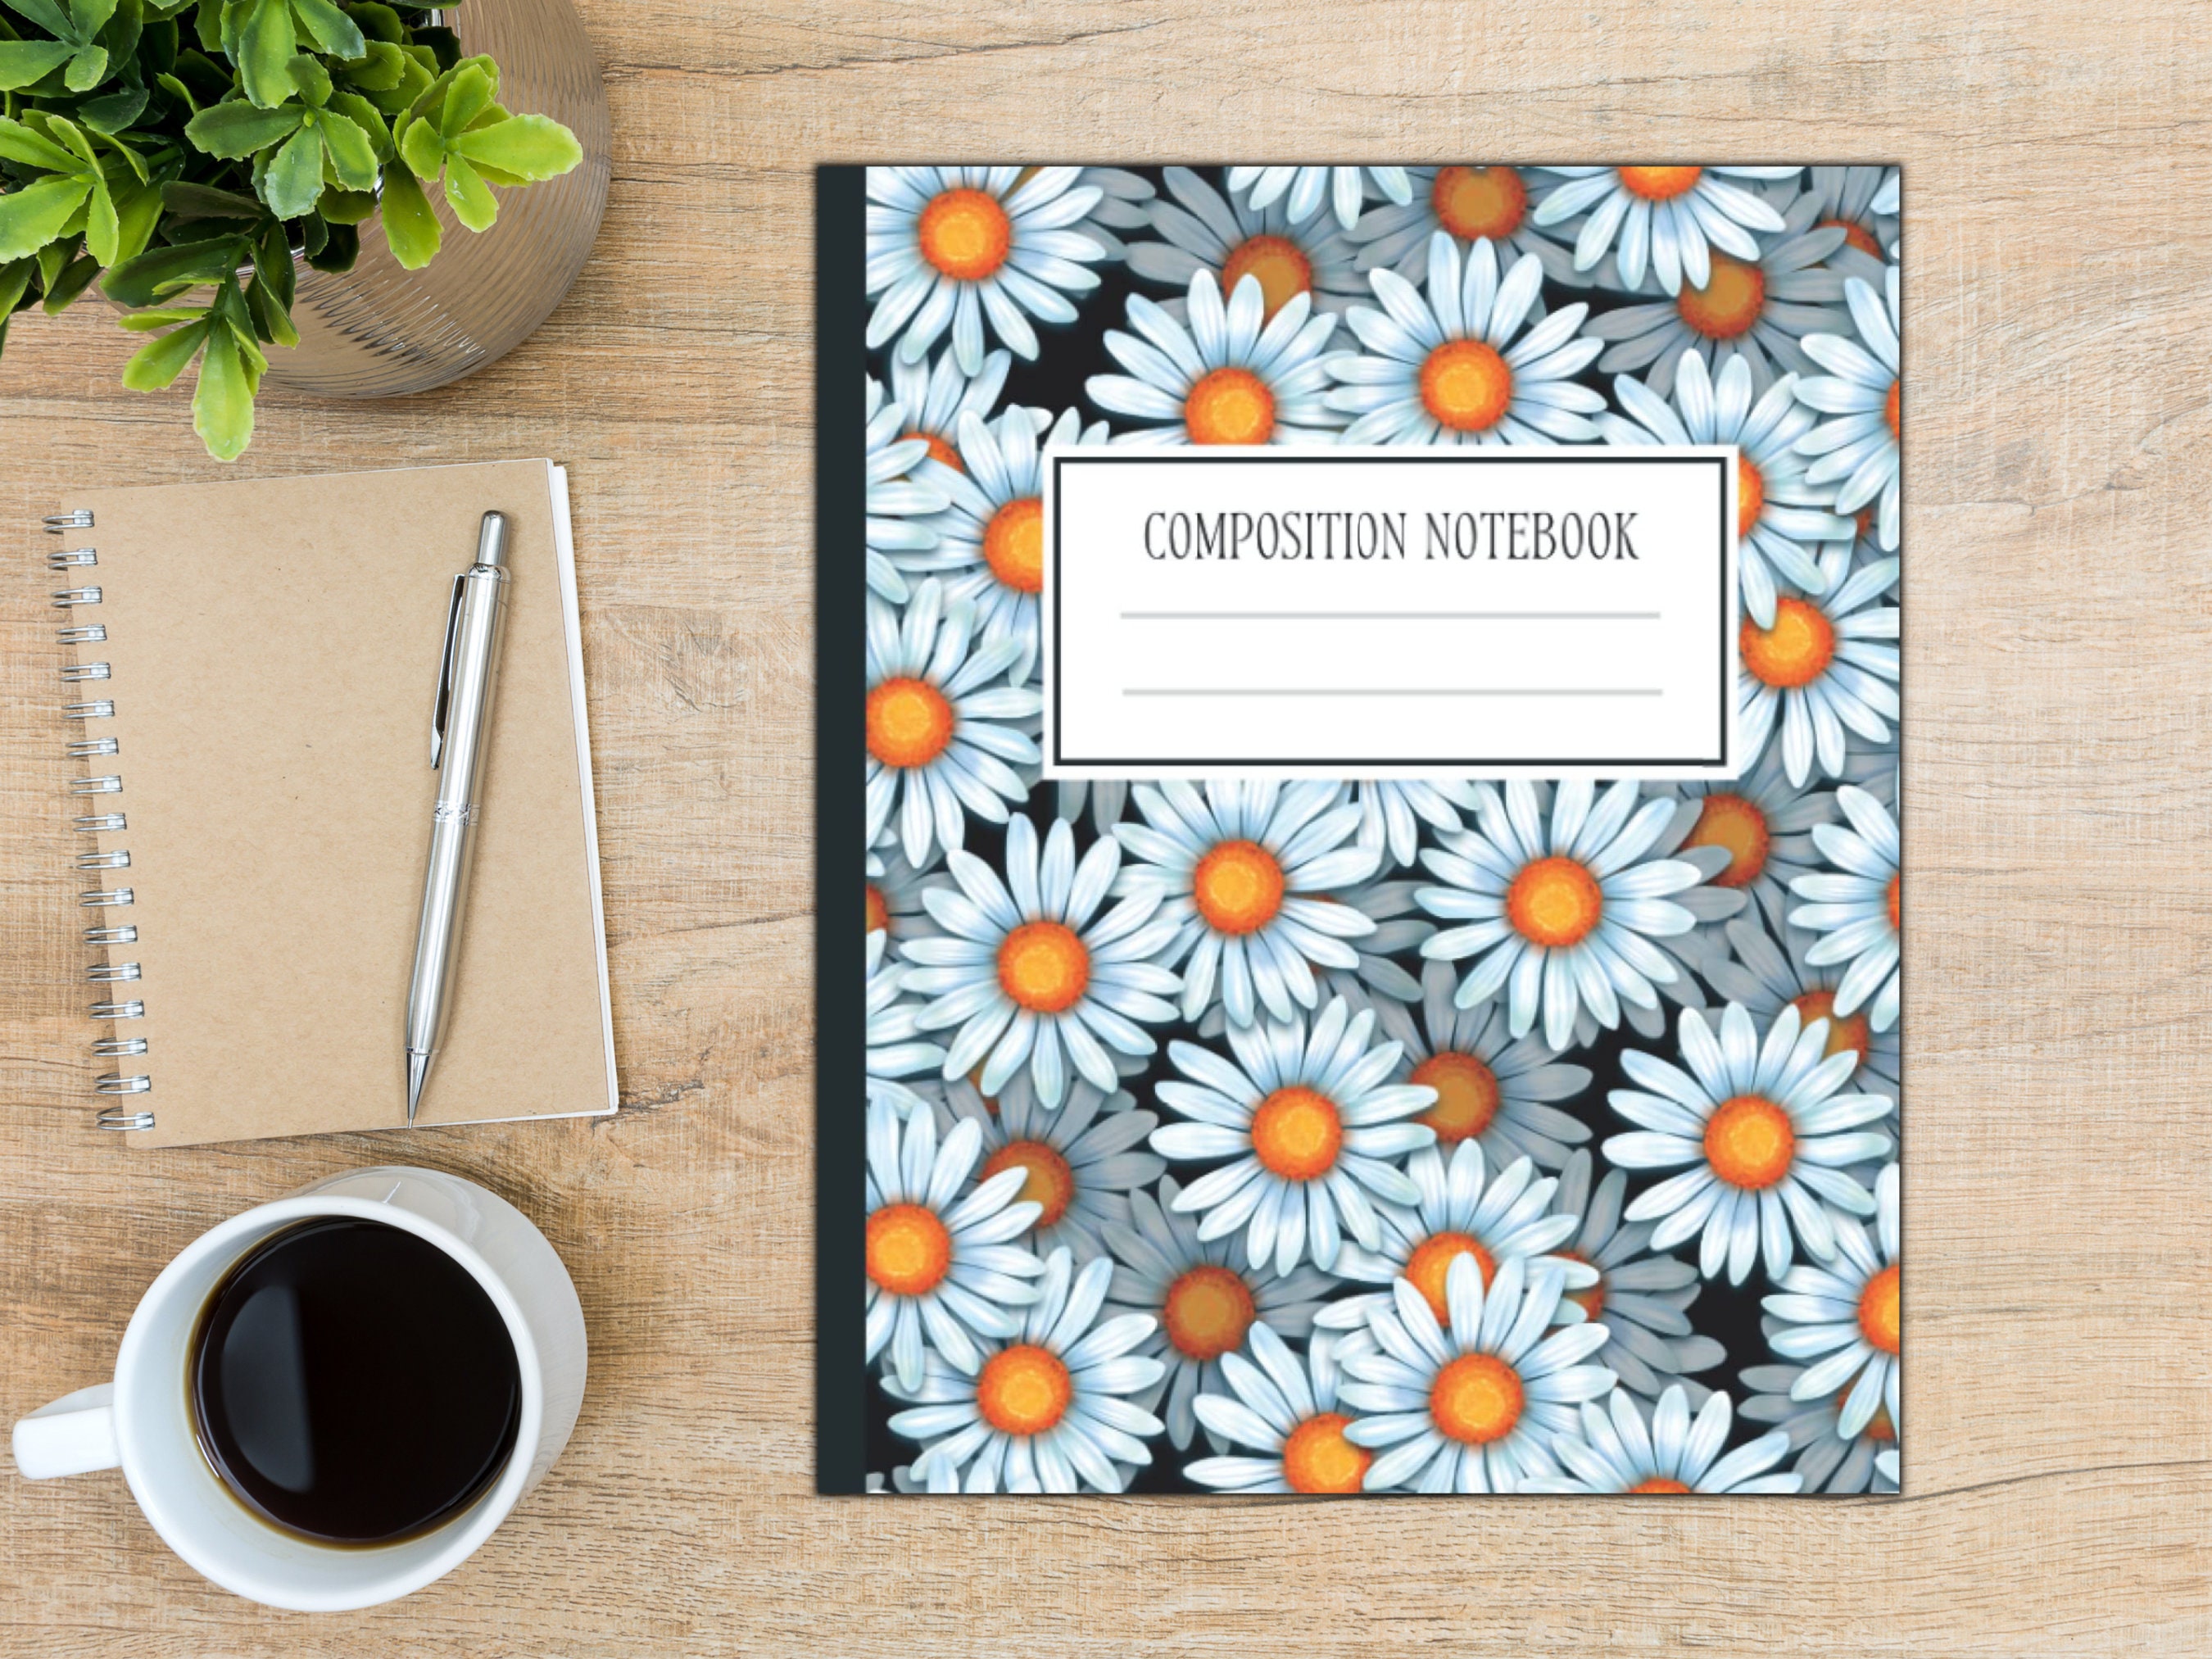 COMPOSITION NOTEBOOK: Flower Daisy Aesthetic College Ruled Etsy